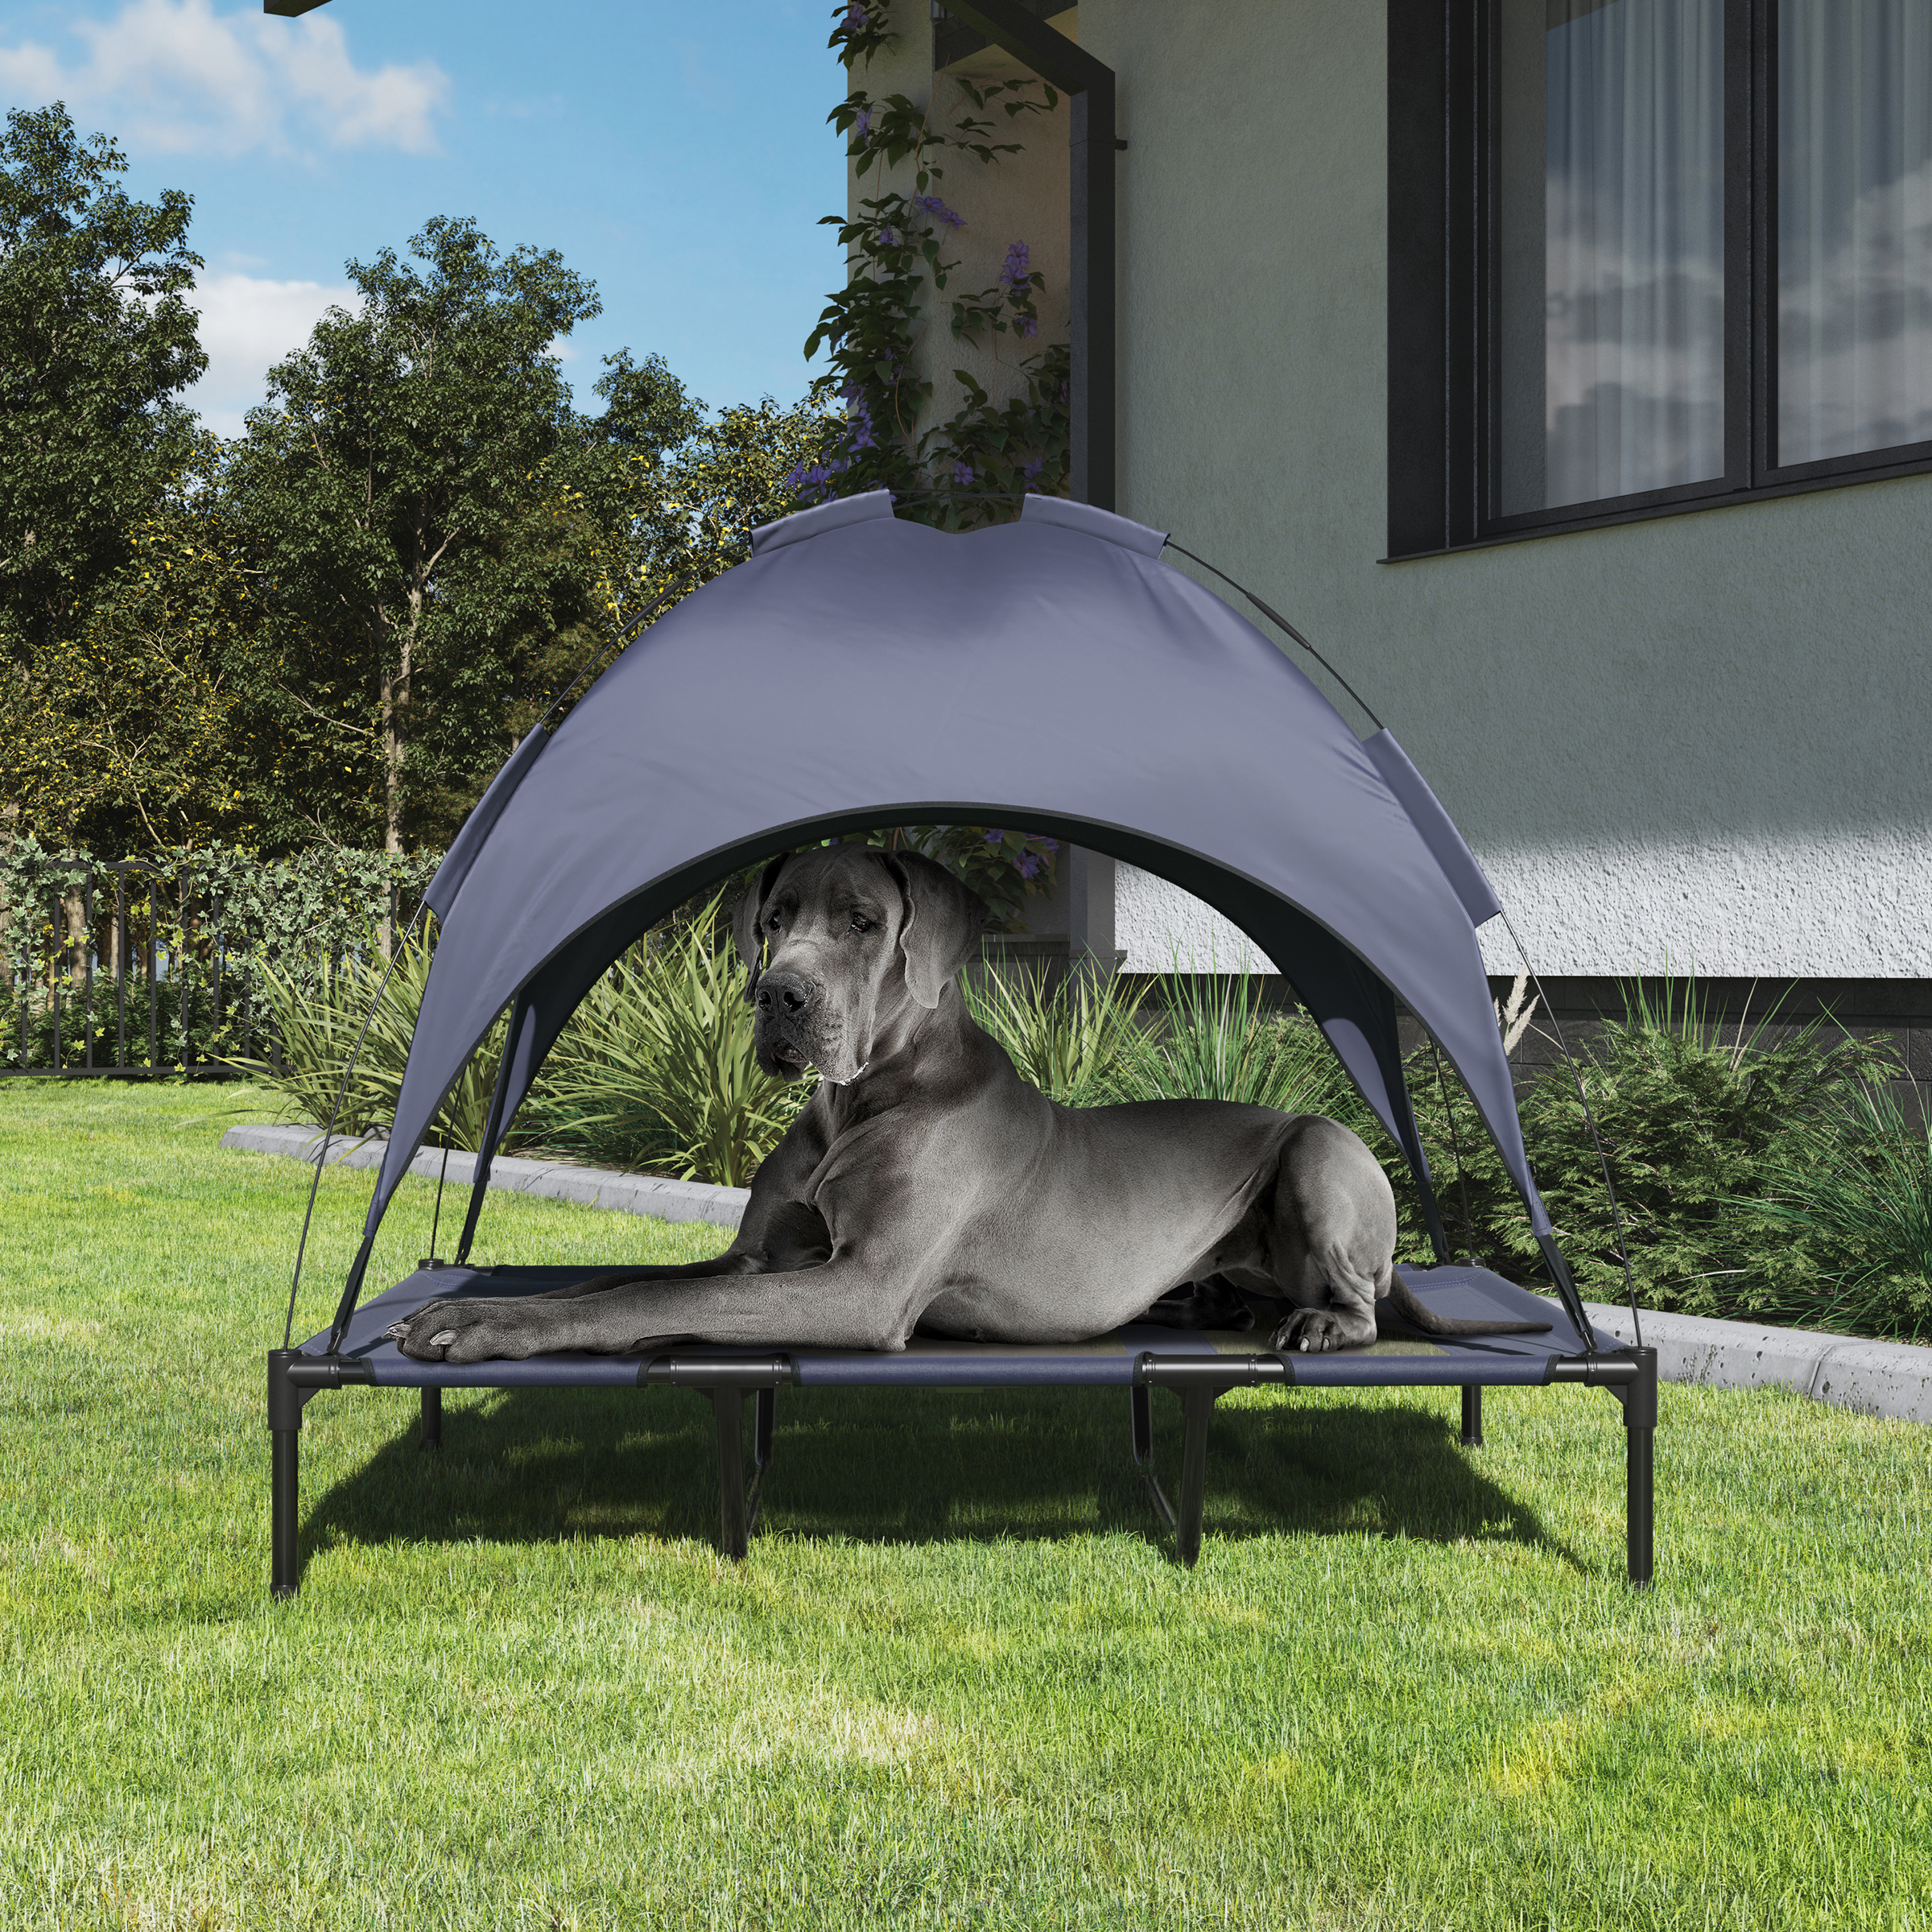 Elevated Dog Bed With Canopy - 48x36-Inch Portable Pet Bed With Non-Slip Feet - Indoor/Outdoor Dog Cot With Carrying Case By PETMAKER (Blue)